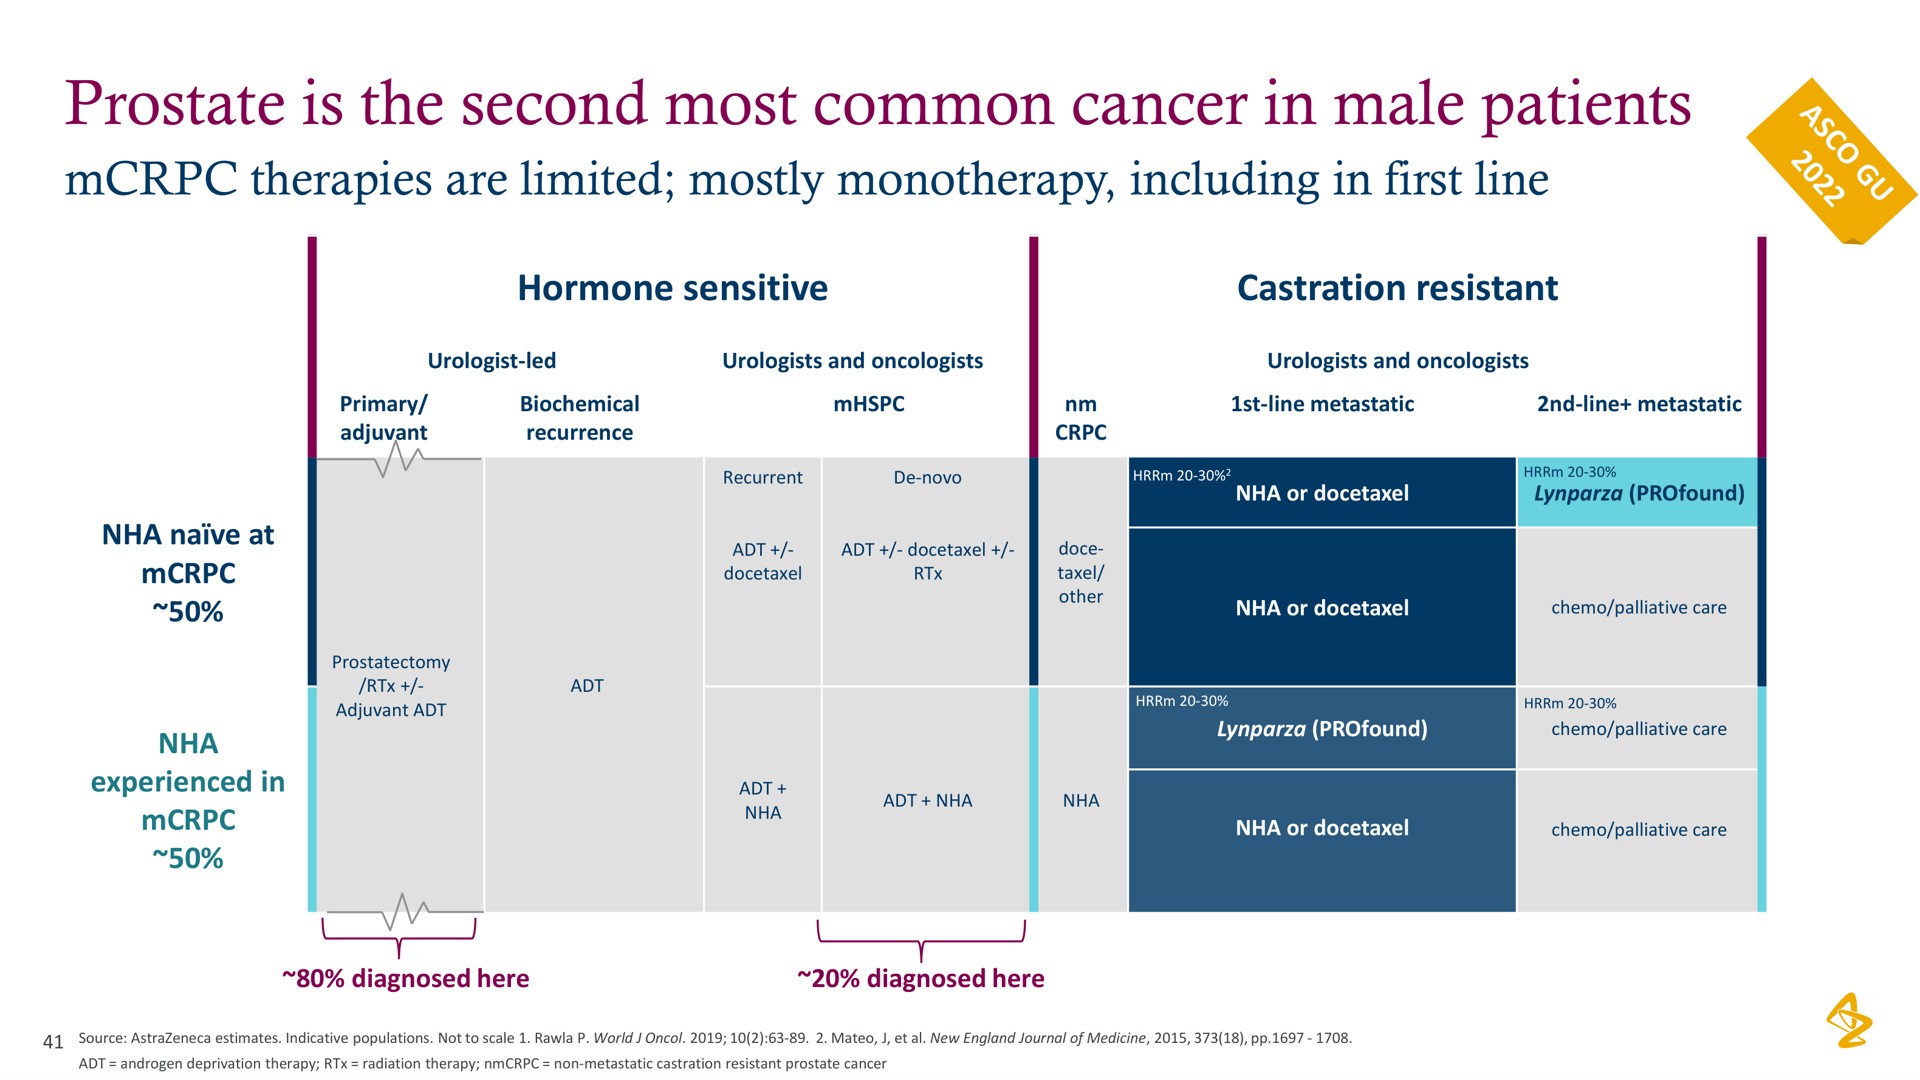 prostate is the second most common cancer in male patients | AstraZeneca